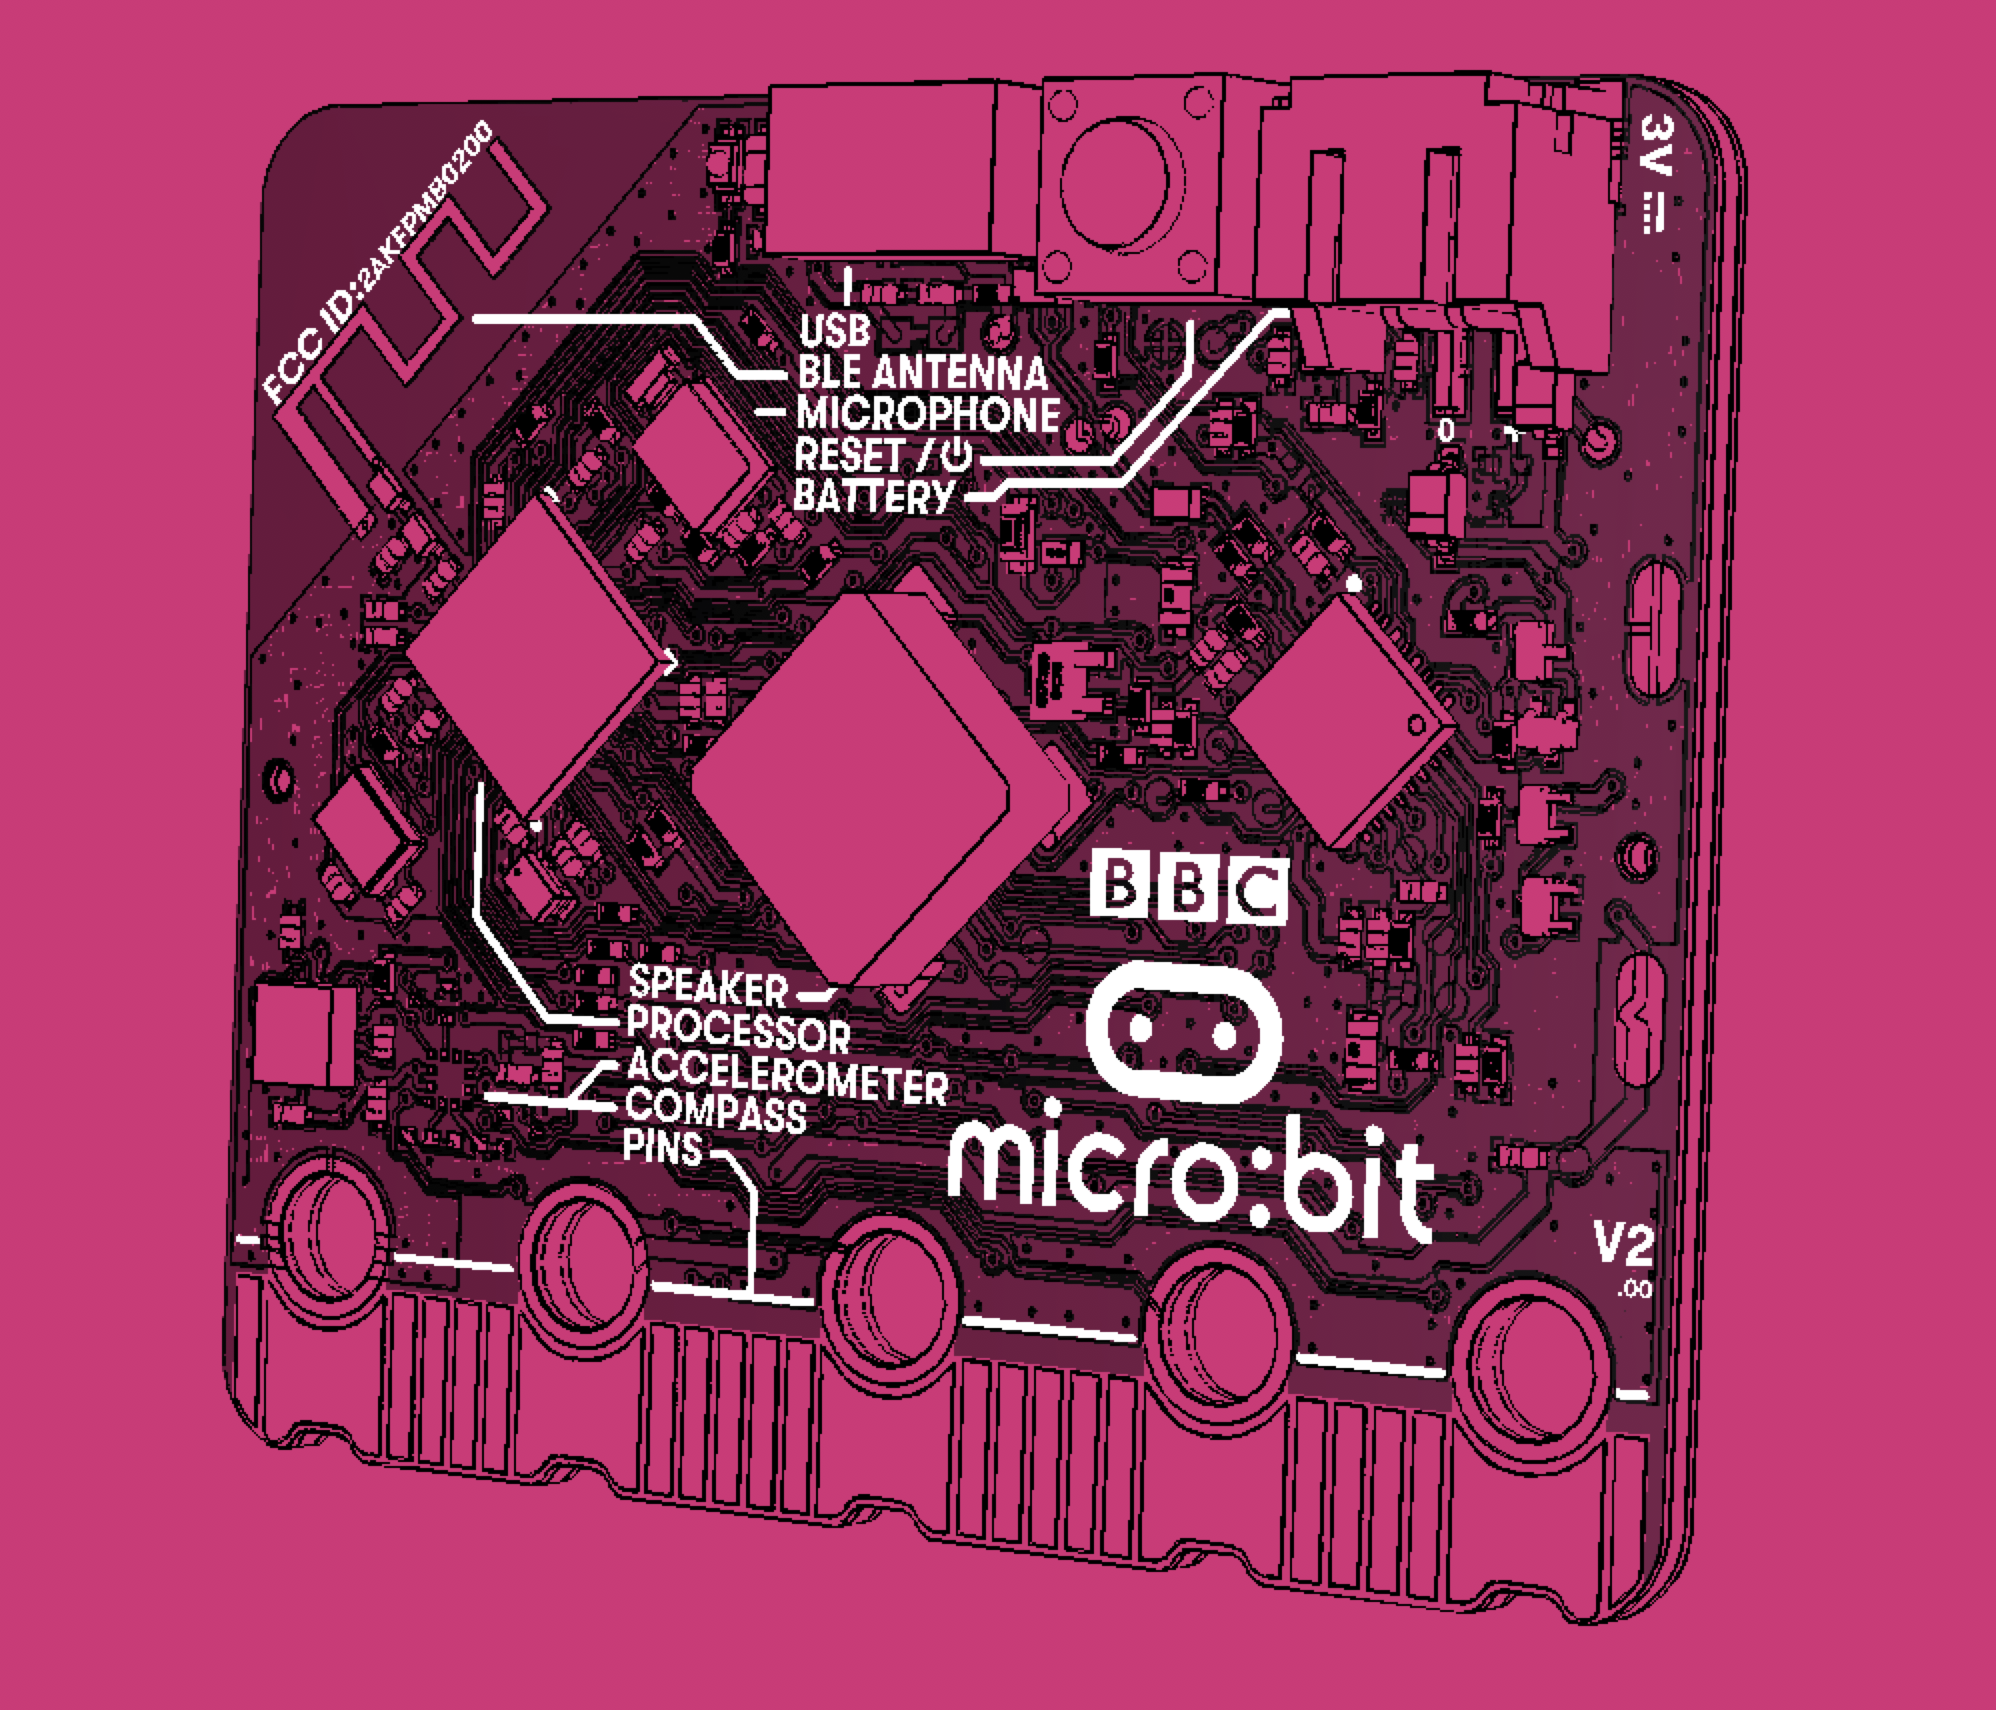 BBC micro:bit - Get ready for a new generation of makers 